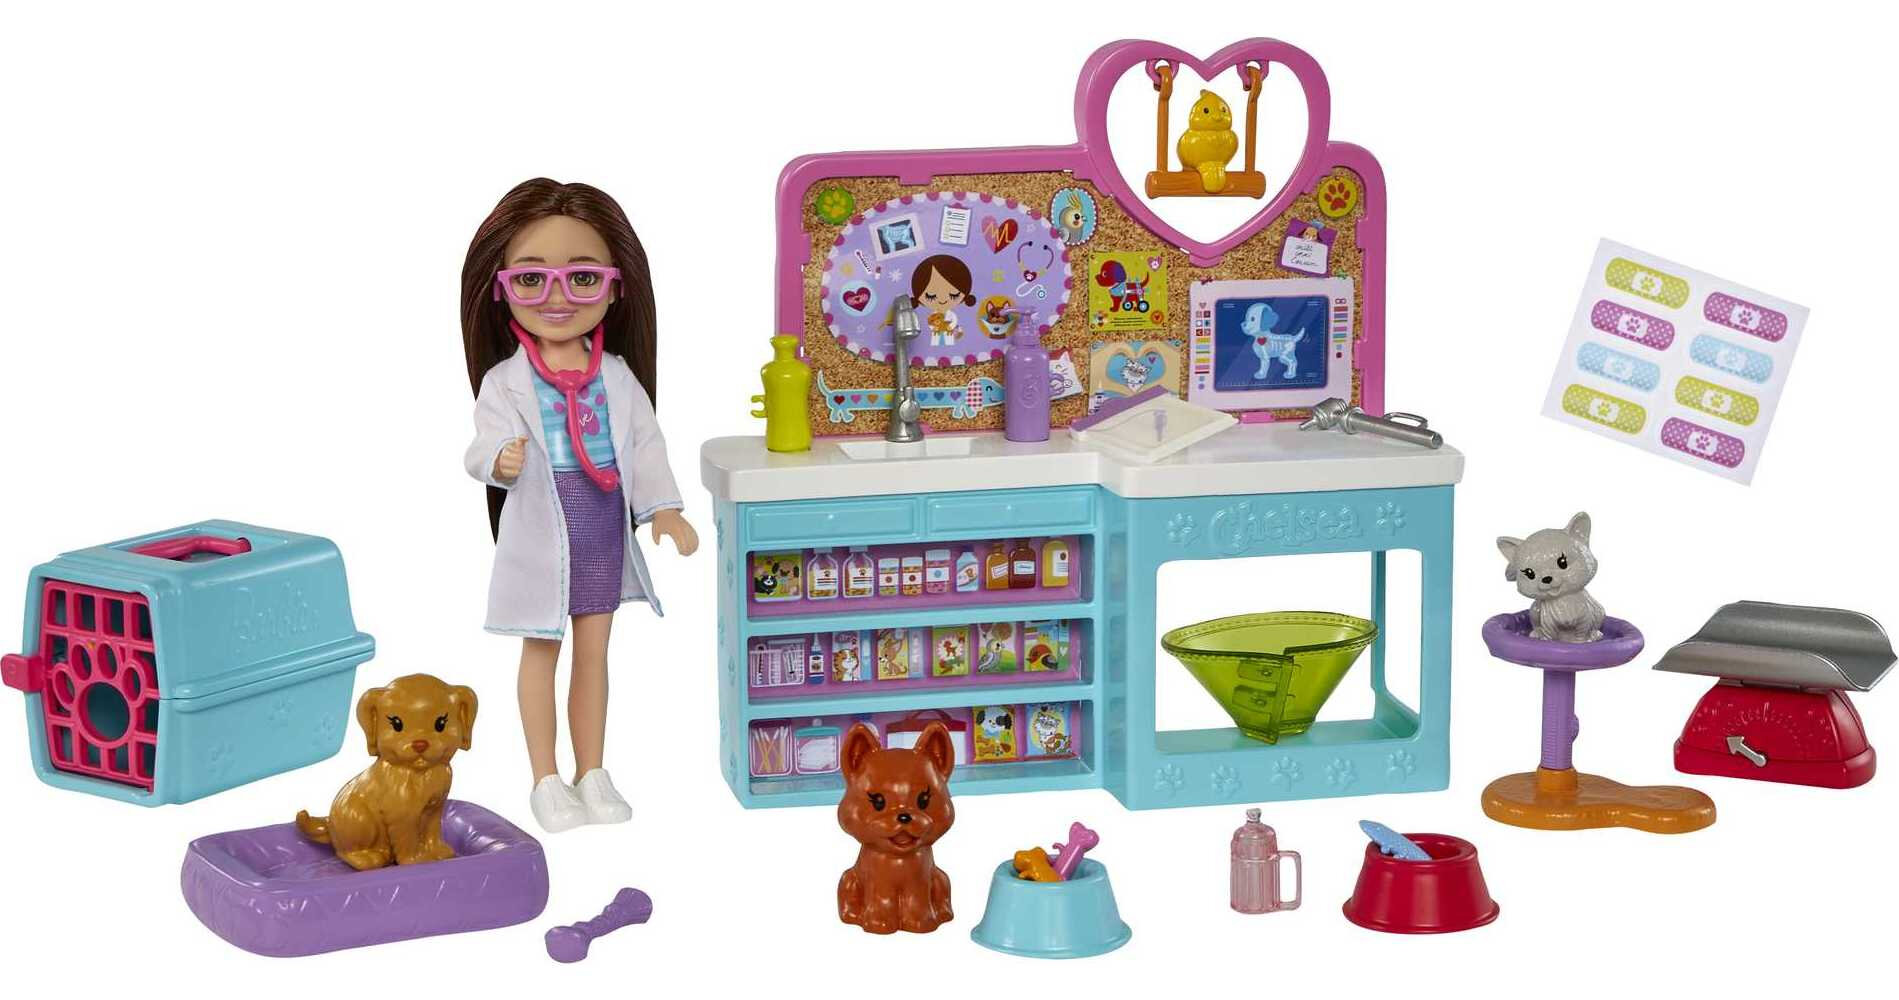 Barbie Doll Chelsea Pet Vet Playset with Doll, 4 Animals and 18 Pieces - image 1 of 7